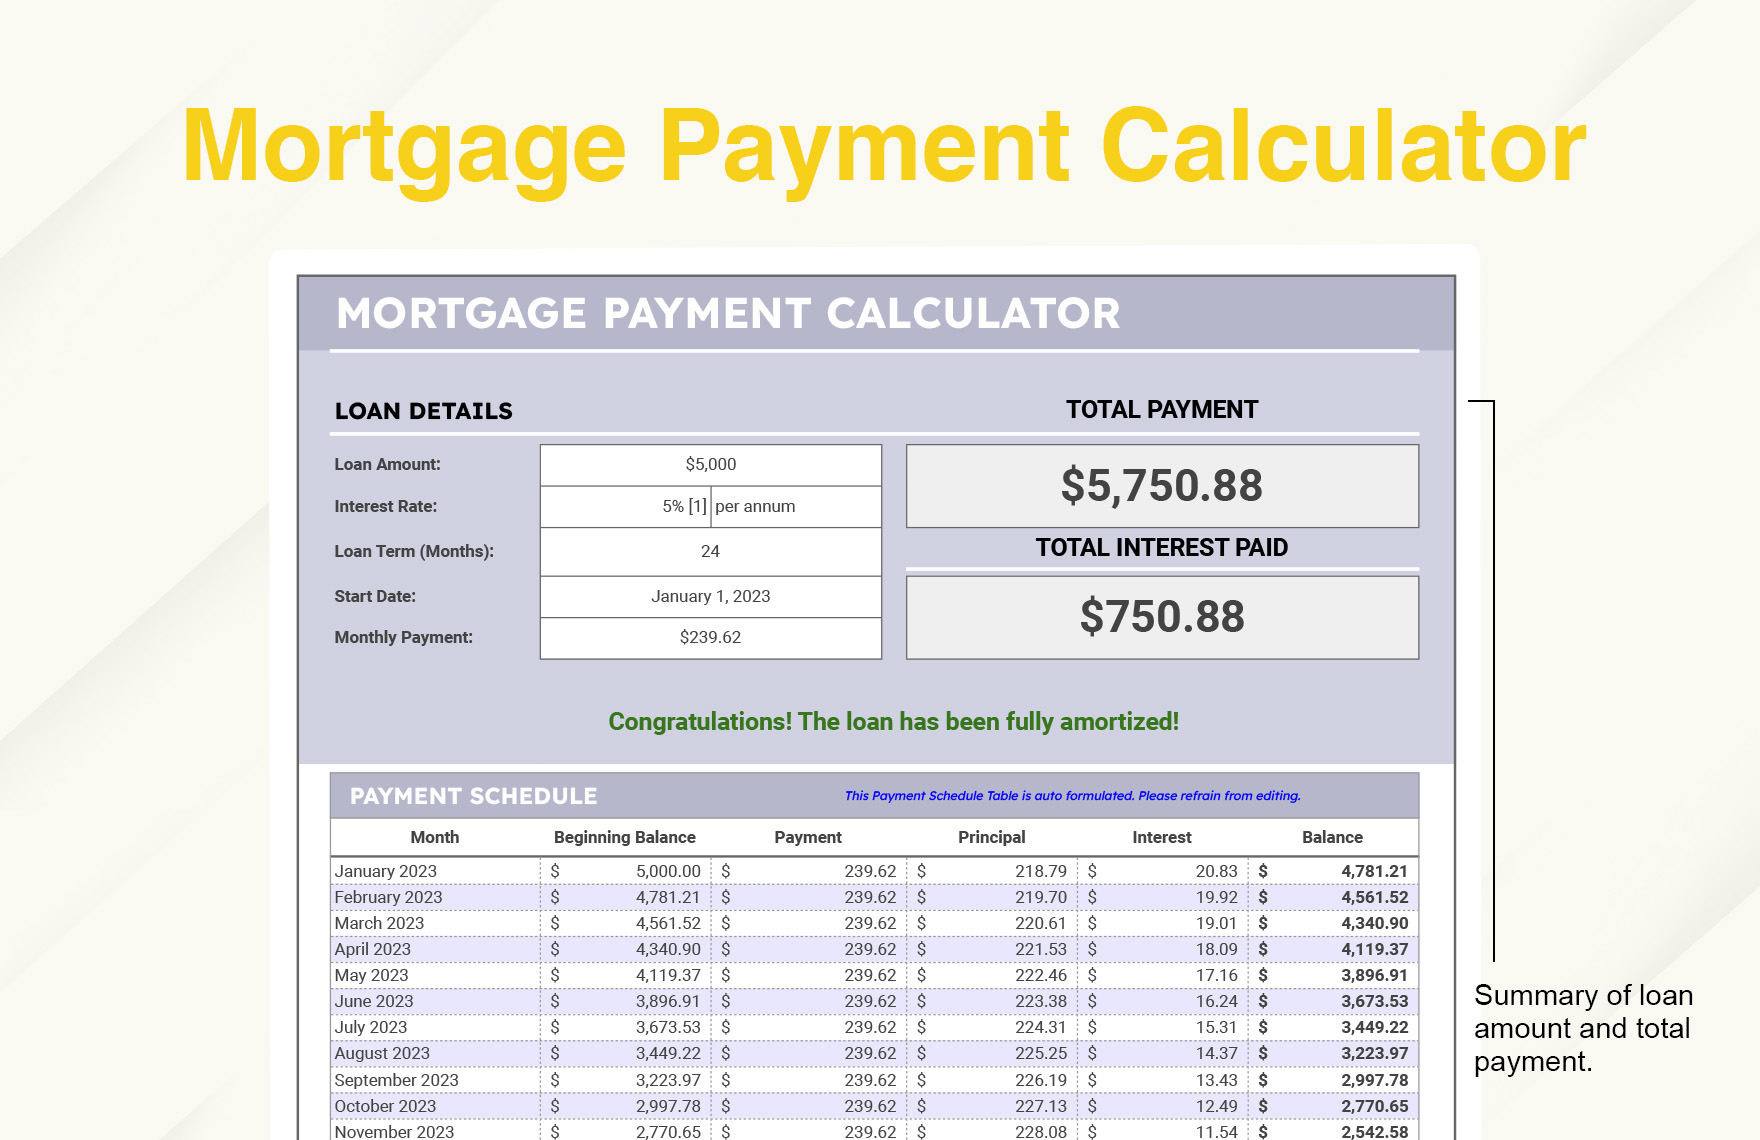 Mortgage Payment Calculator Template